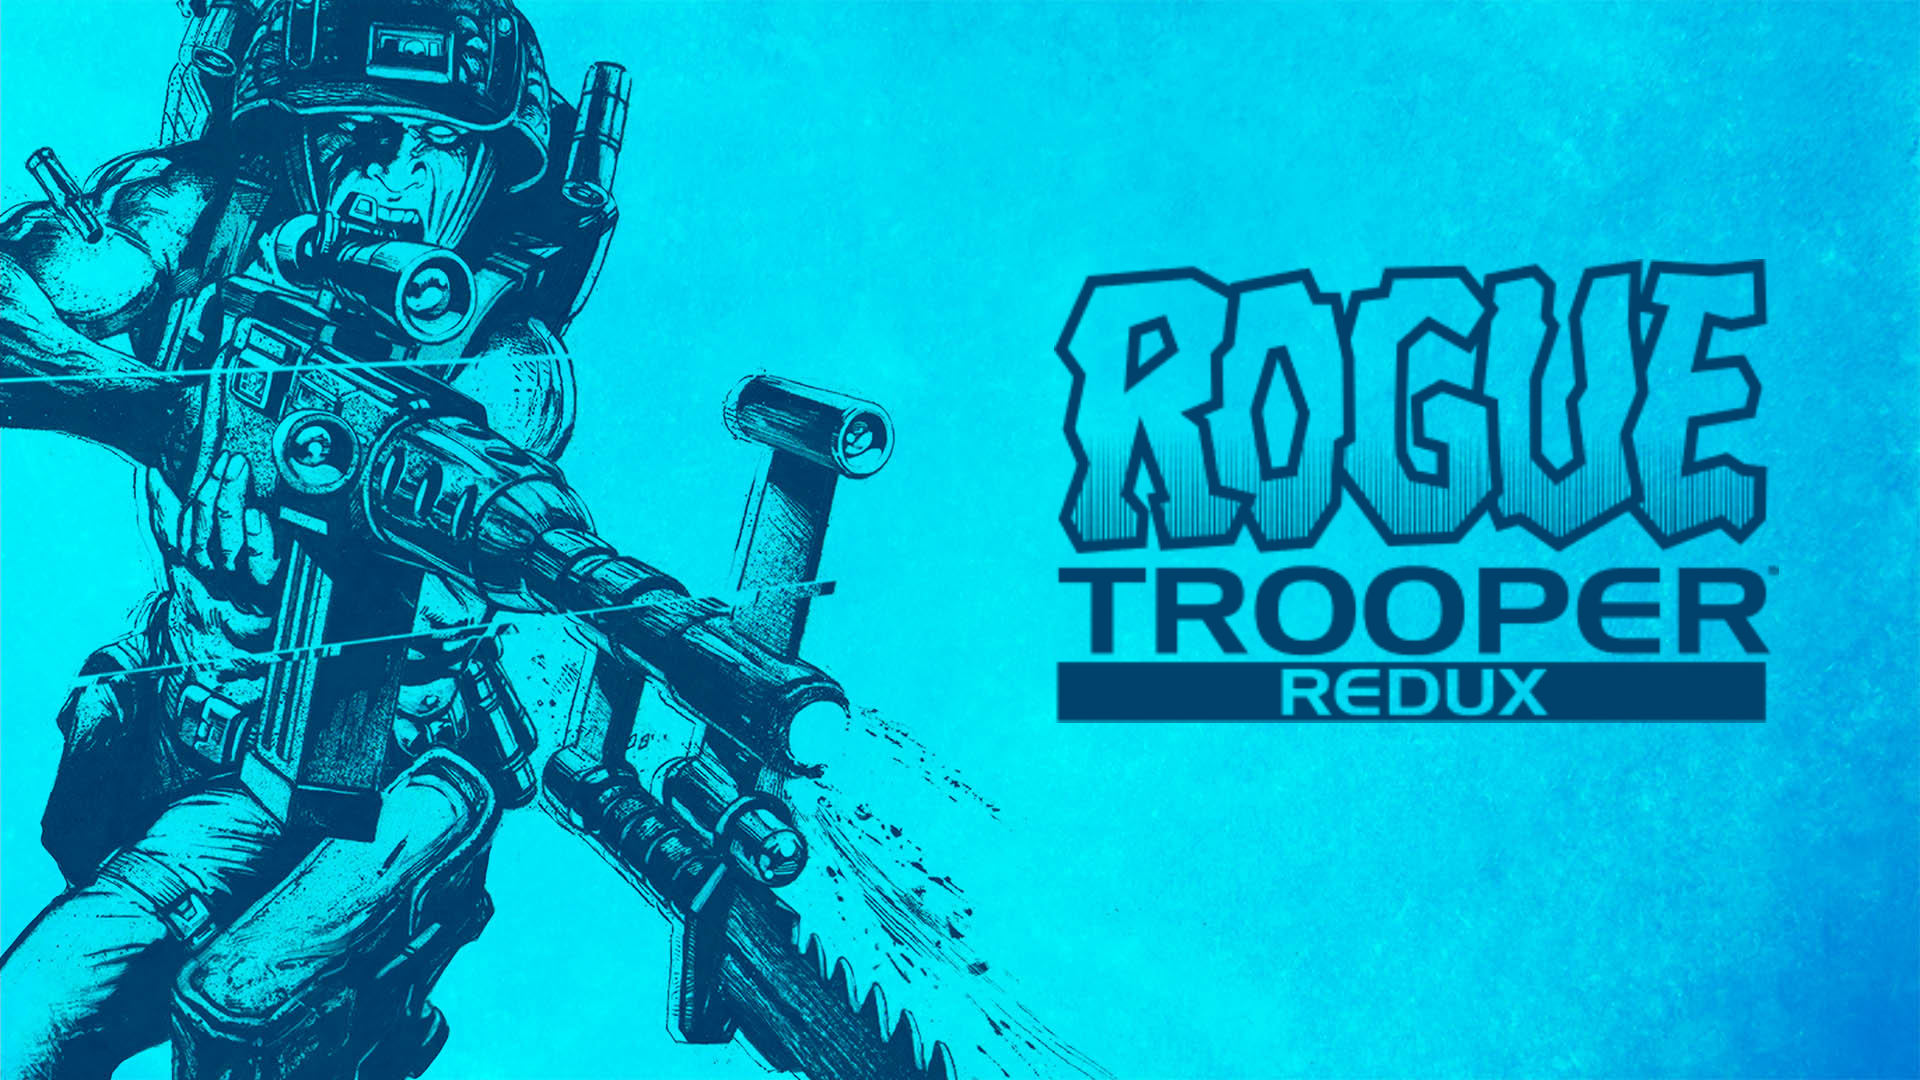 Rogue Trooper Redux game poster